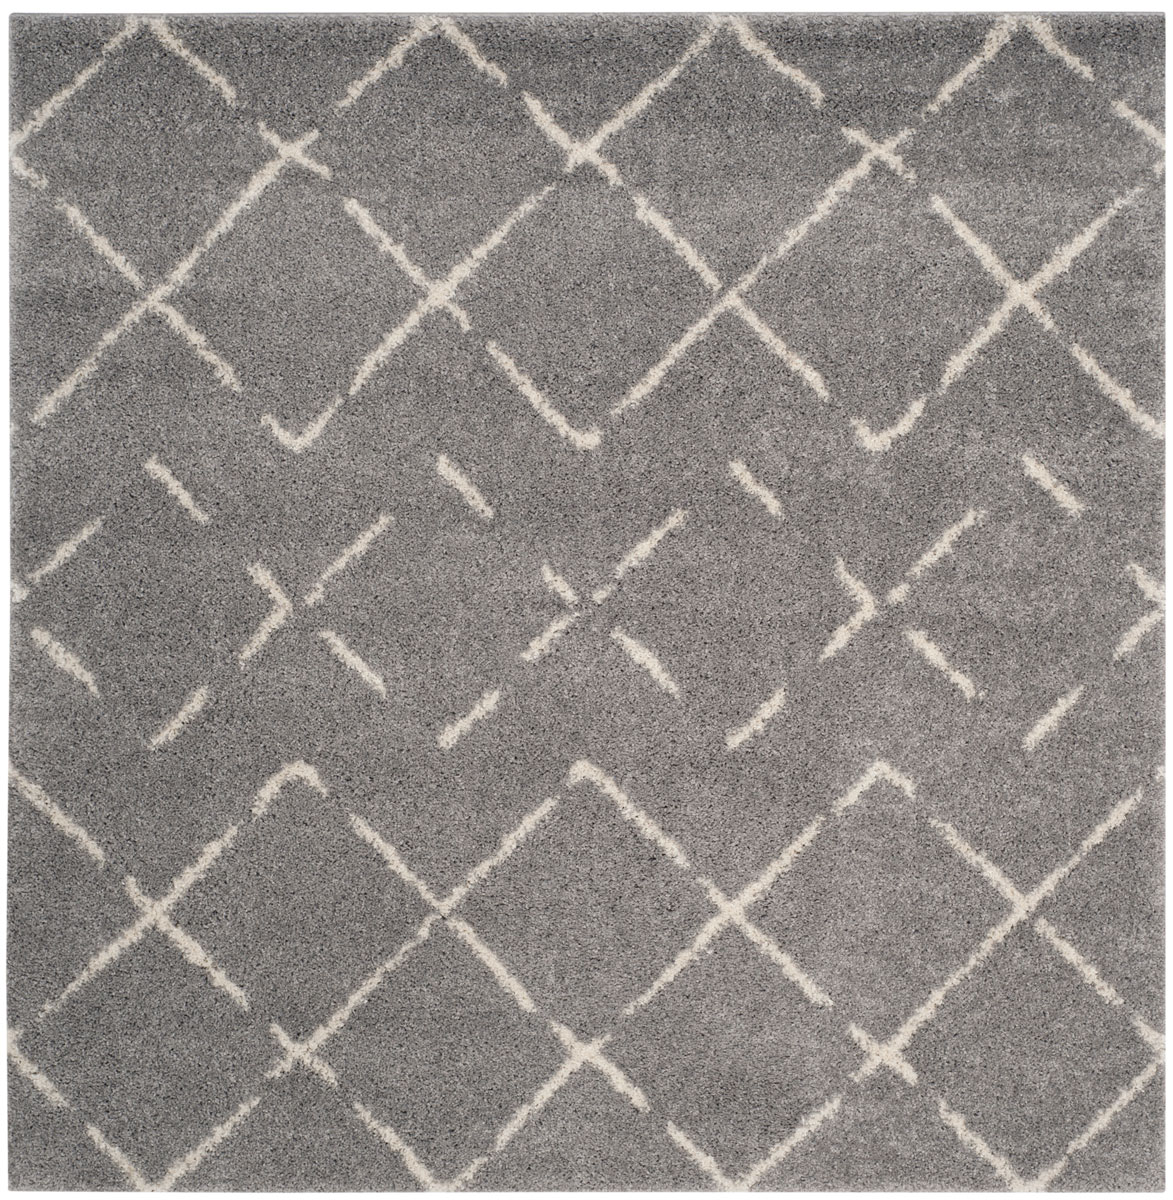 Asg743d-7sq Arizona Shag Power Loomed Square Area Rug, Grey & Ivory - 6 Ft.-7 In. X 6 Ft.-7 In.